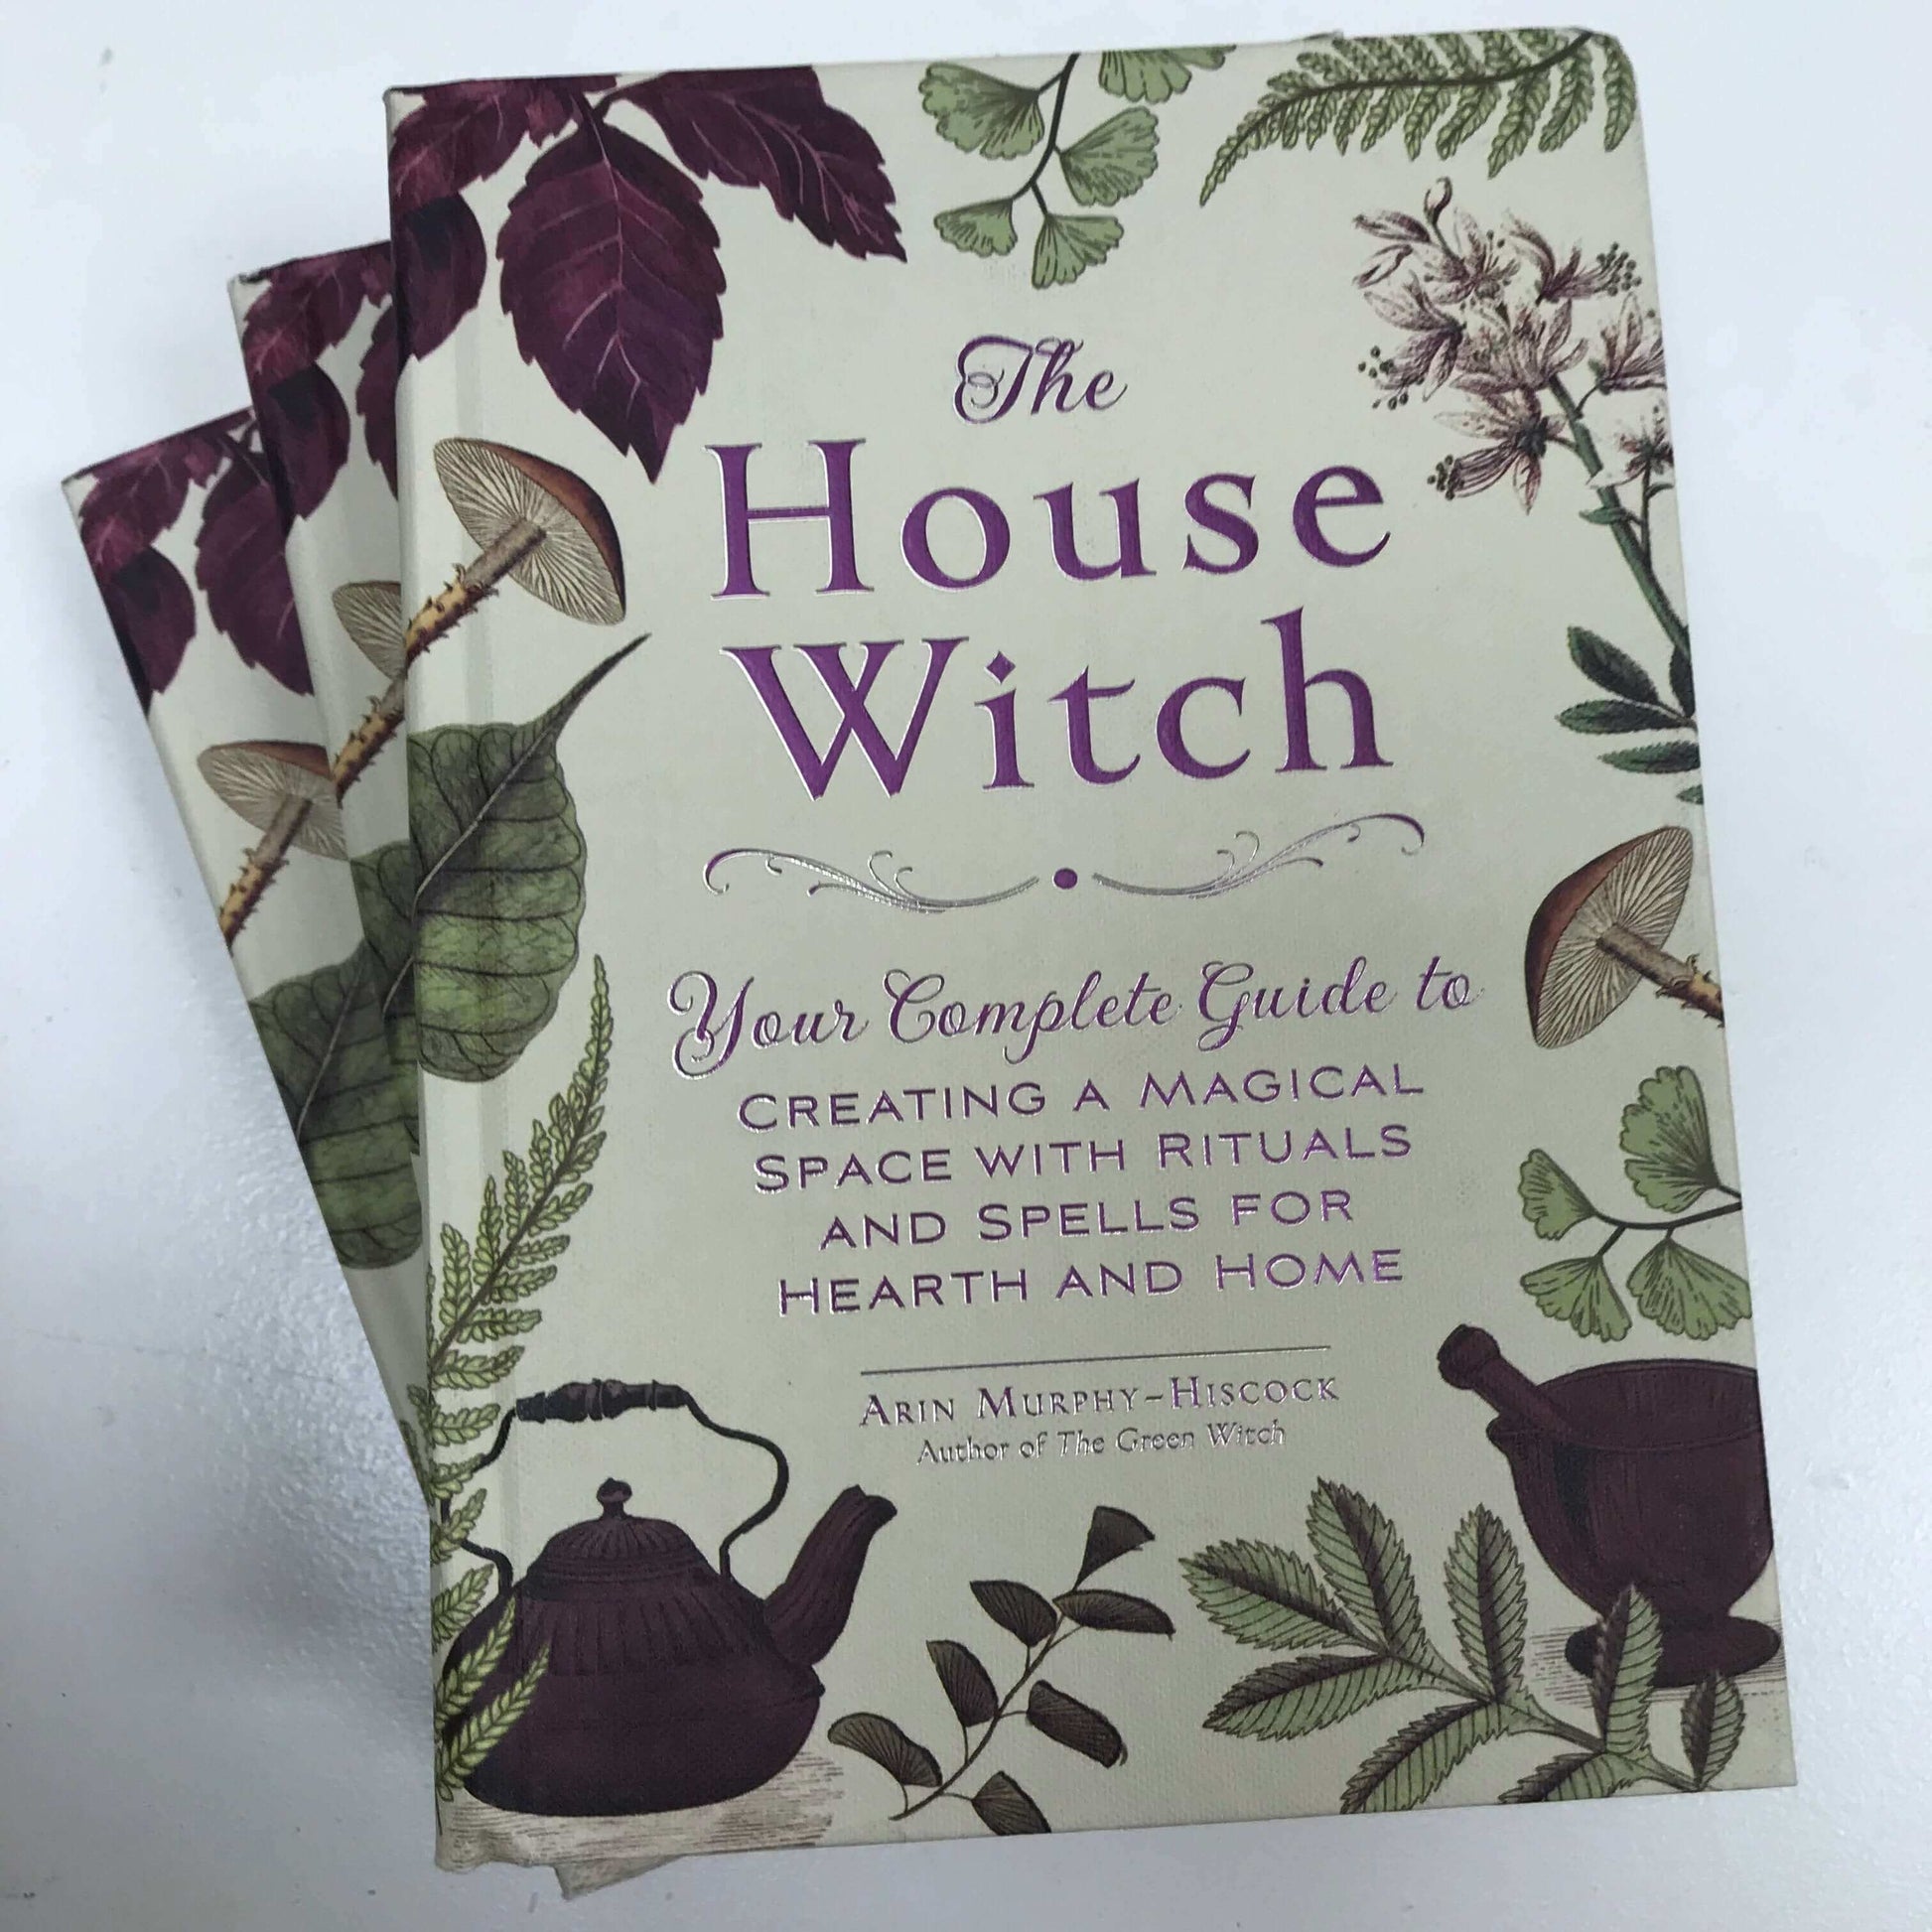 The House Witch: Your Complete Guide to Creating a Magical Space at $21.72 only from Spiral Rain